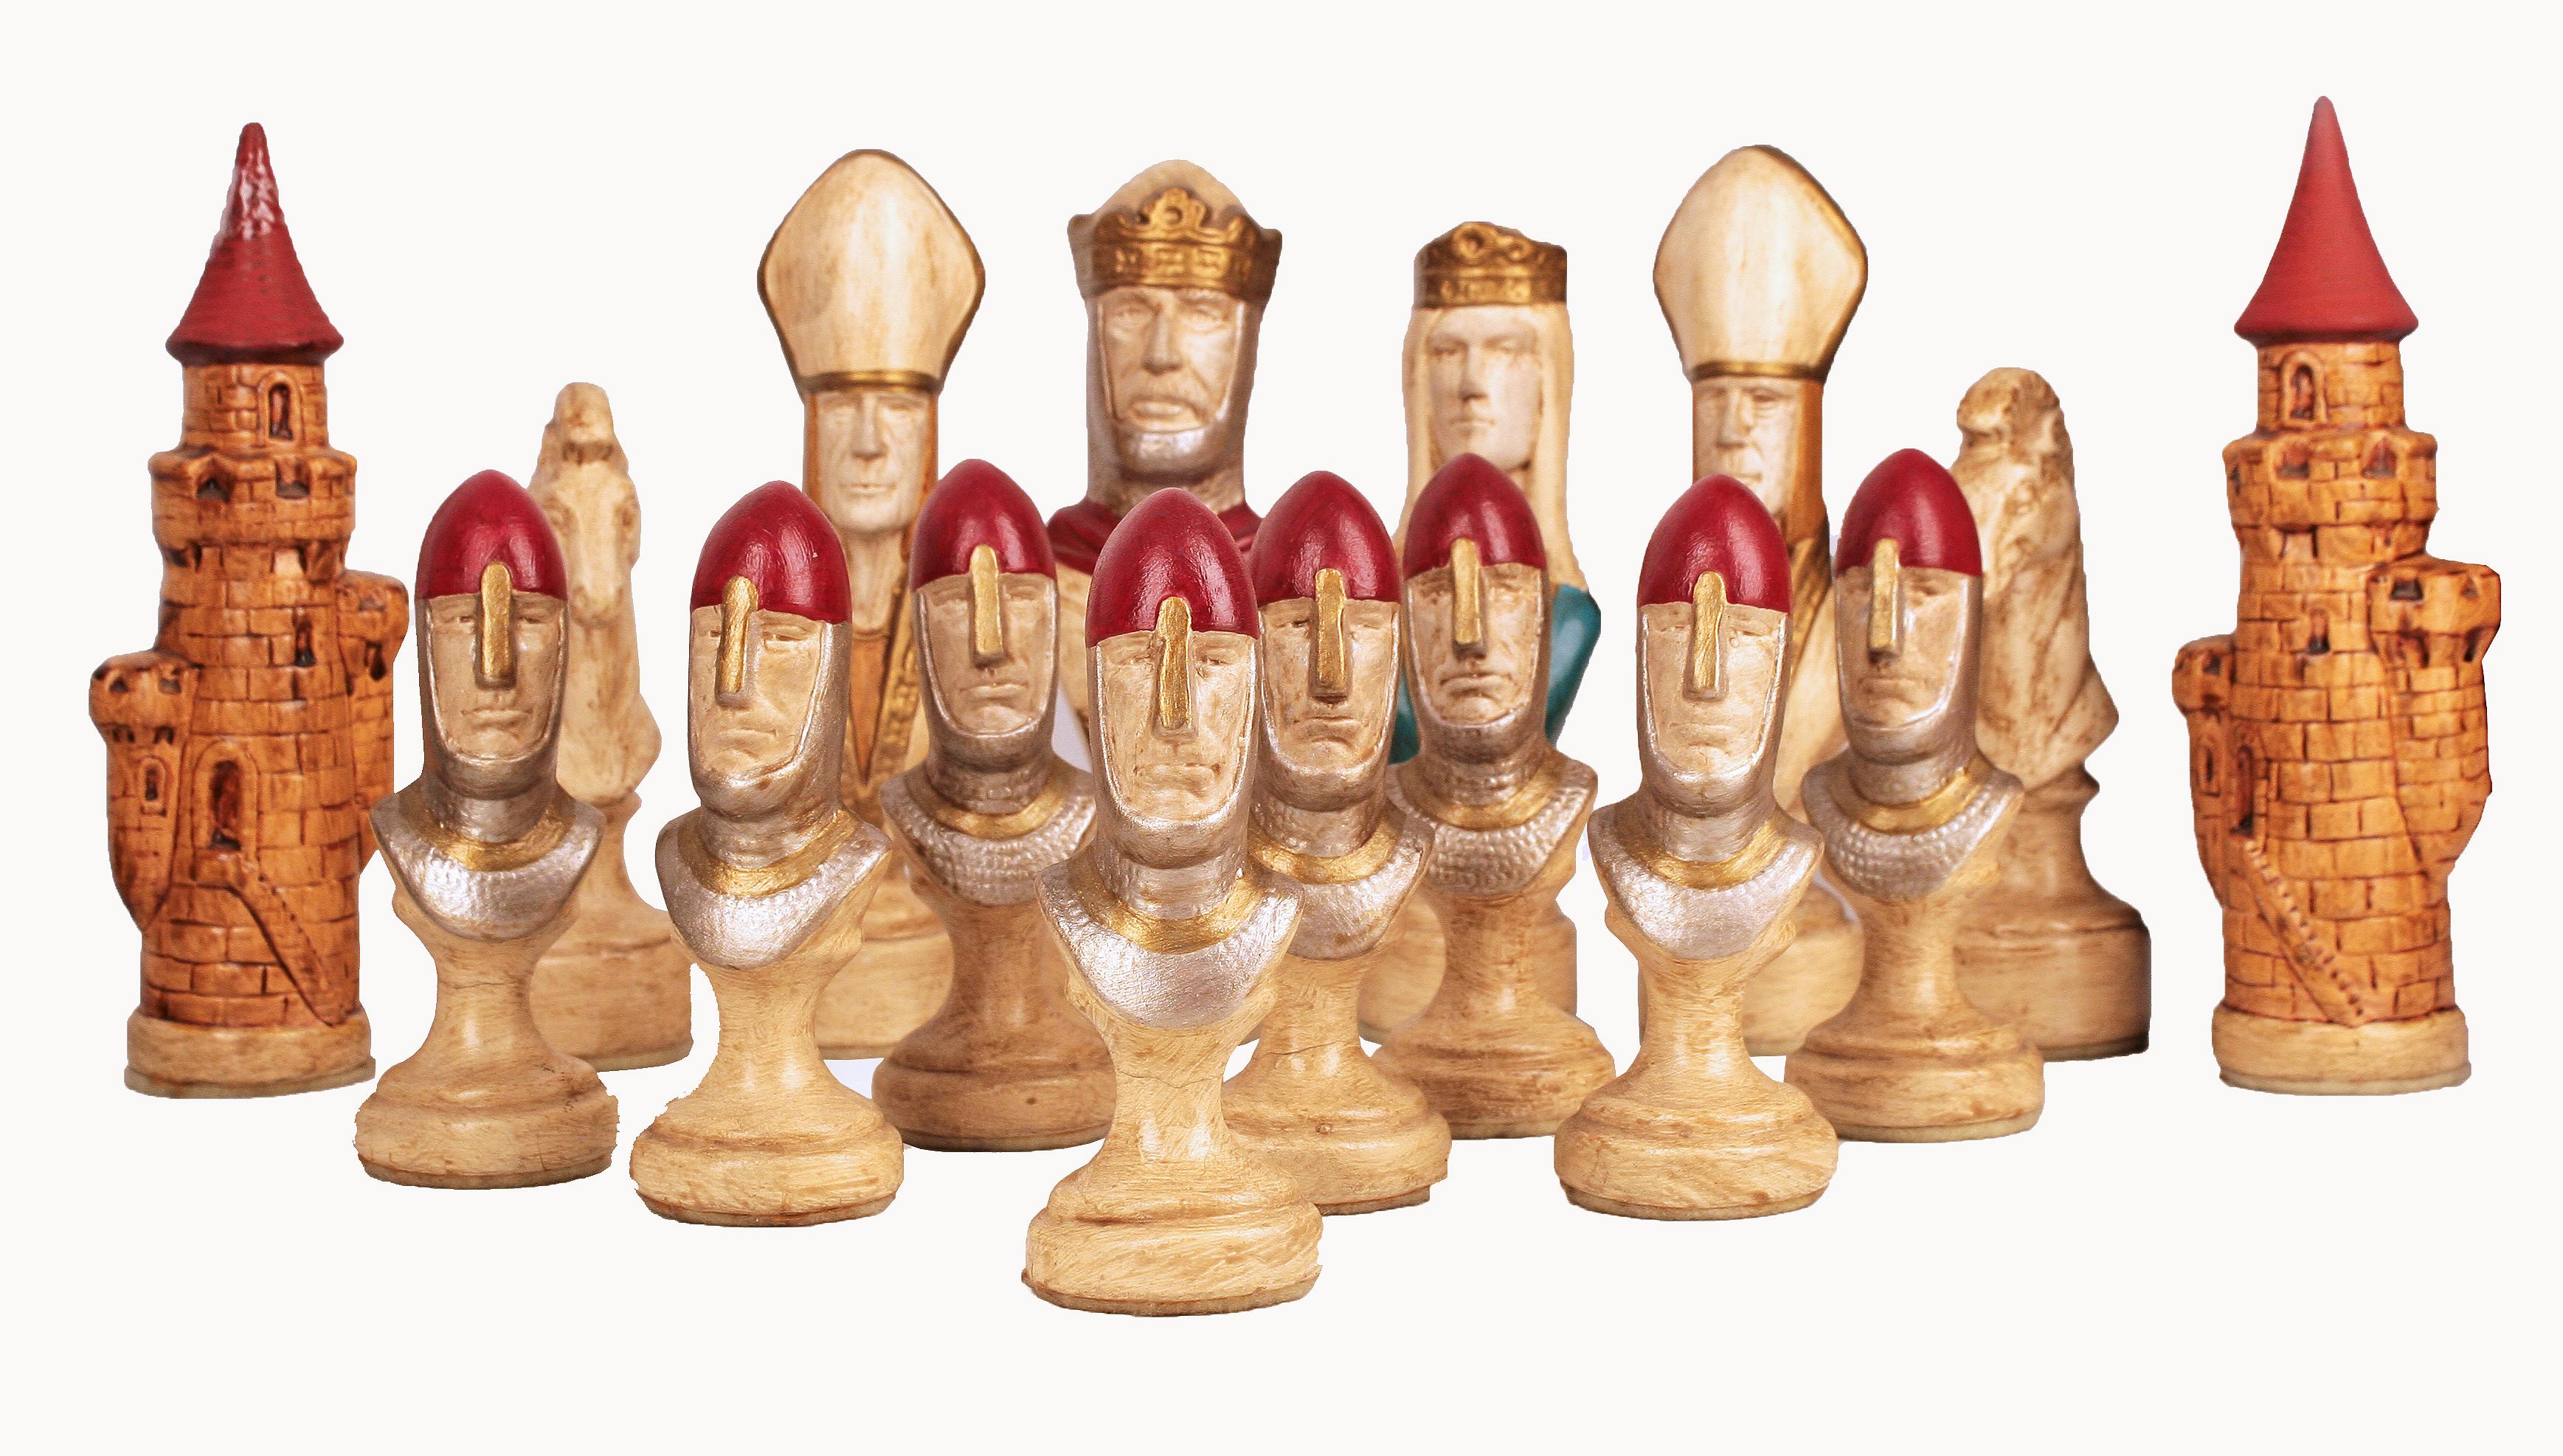 Mid-Century Modern Mid-20th Century English Camelot/King Arthur Chess Set in Hand-Painted Ceramic For Sale